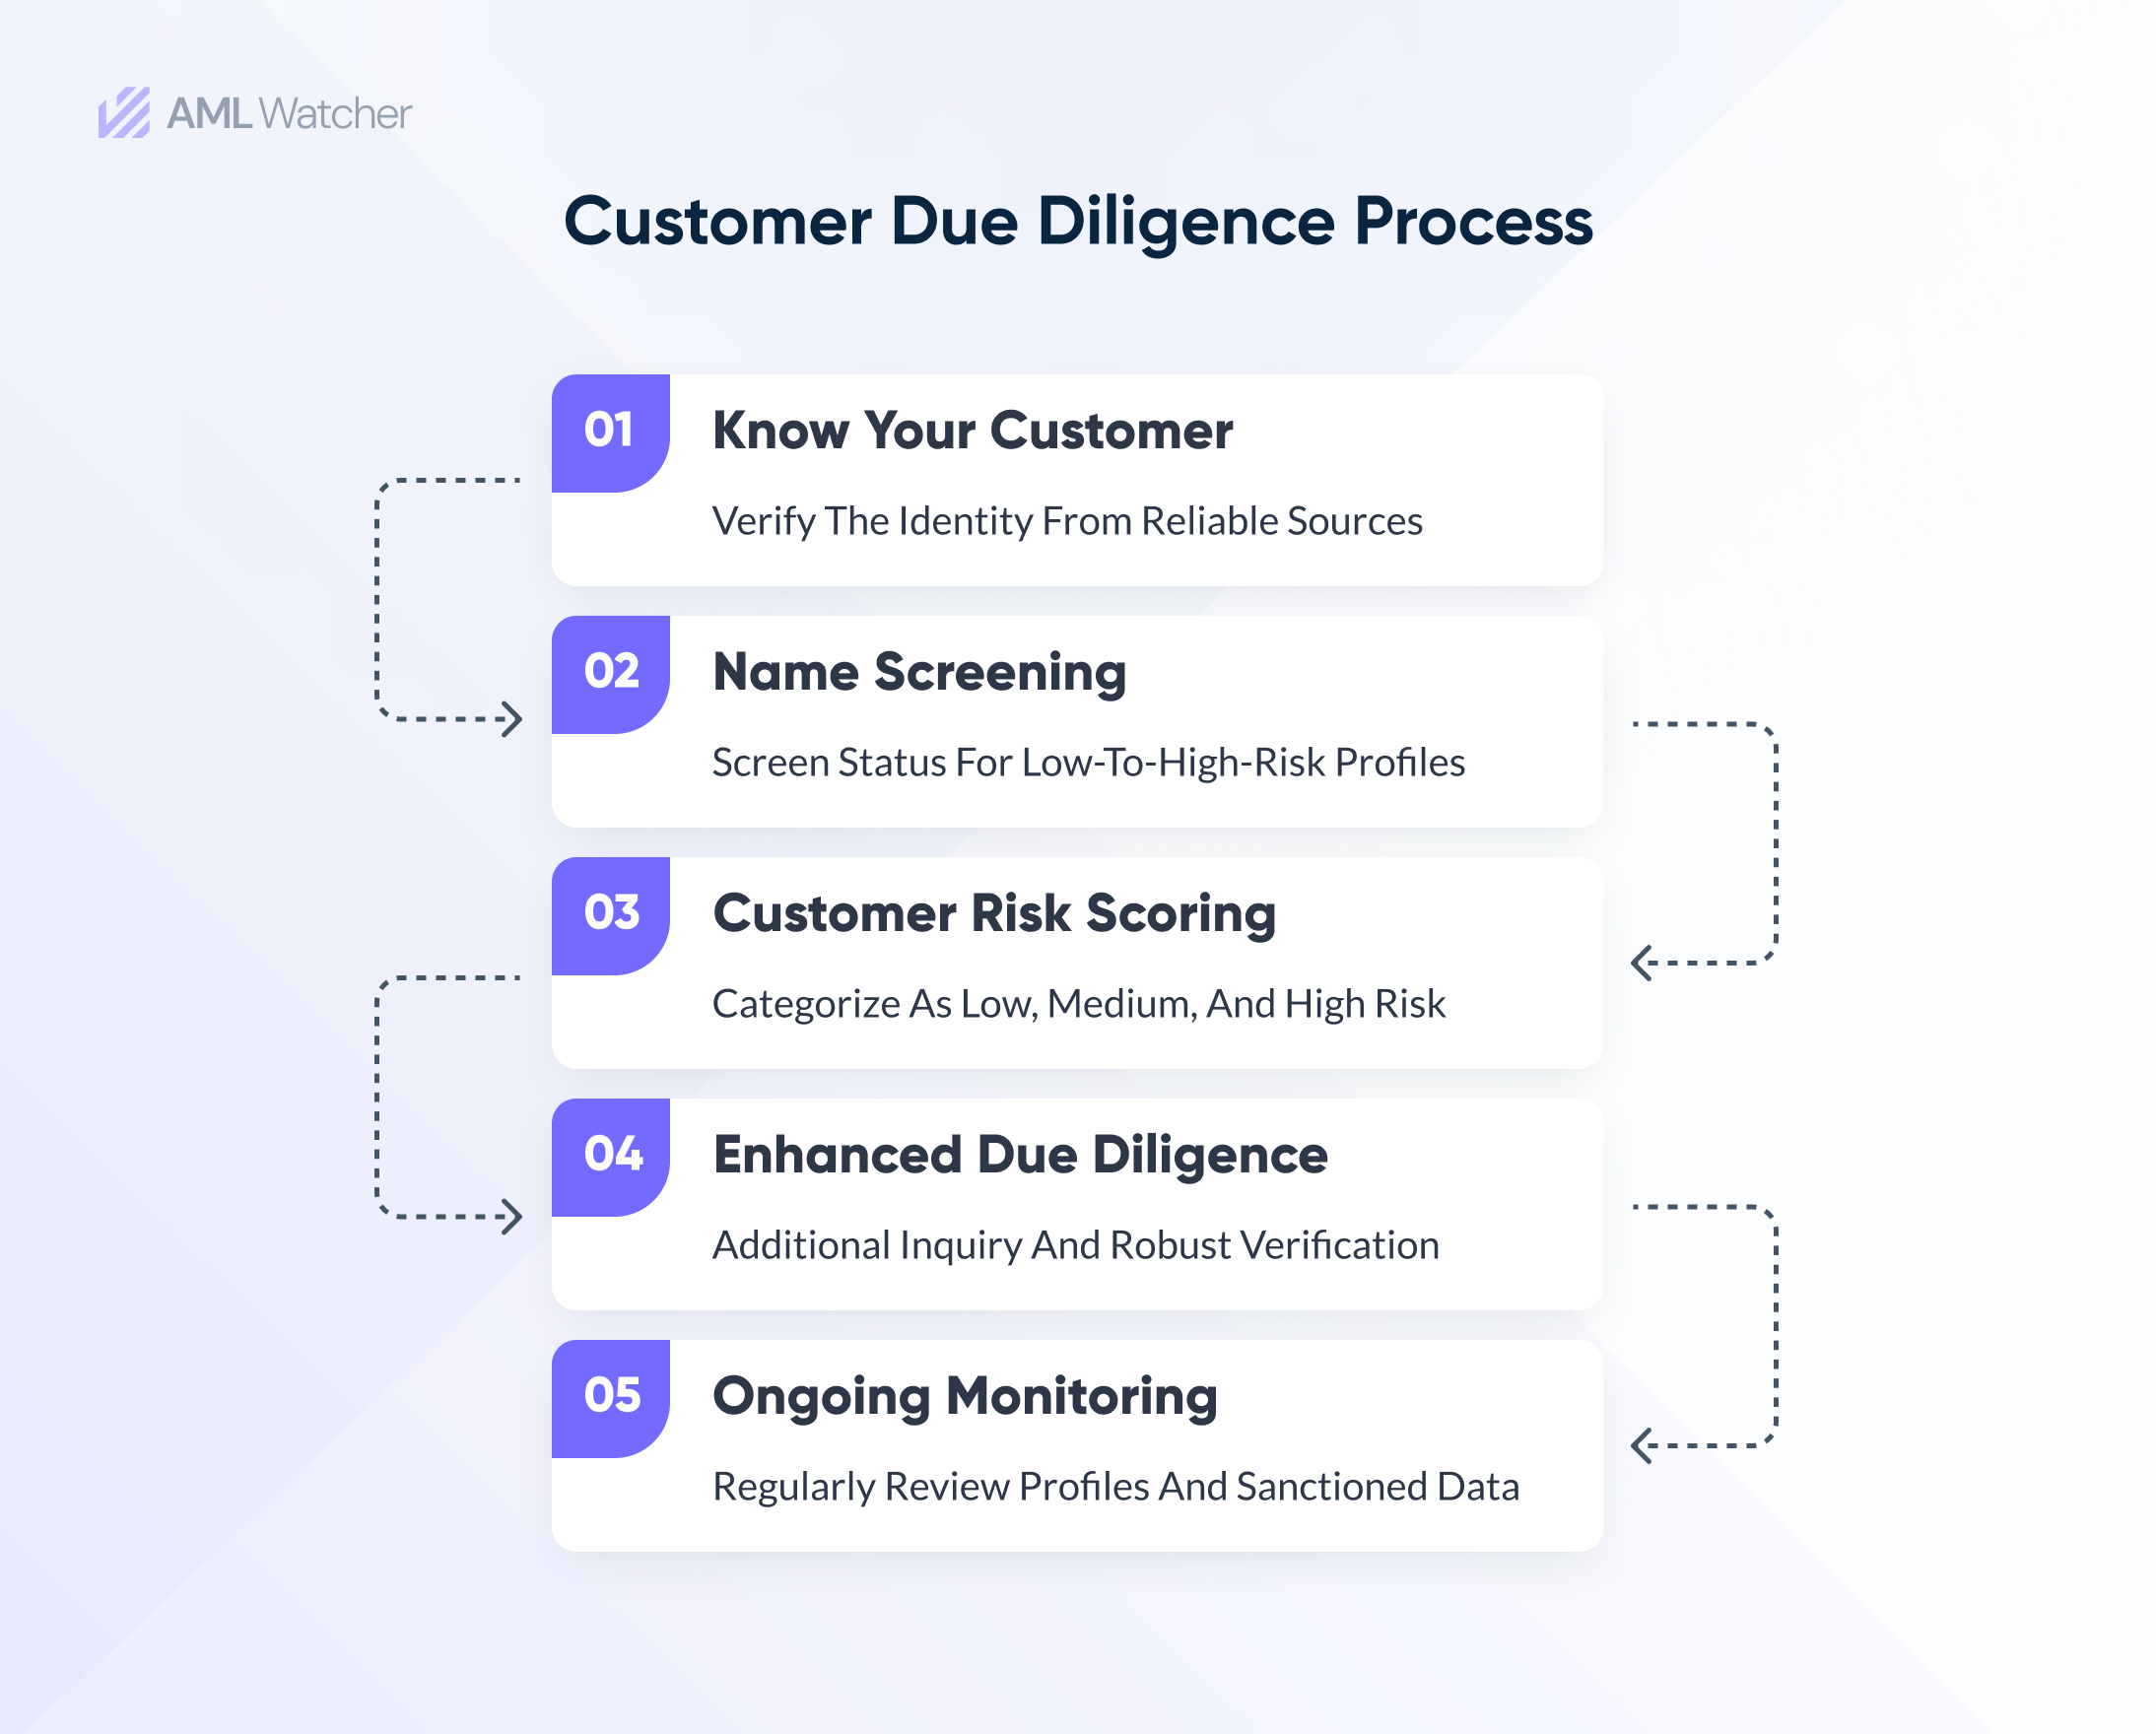 This image shows the significance of the process of Customer due diligence